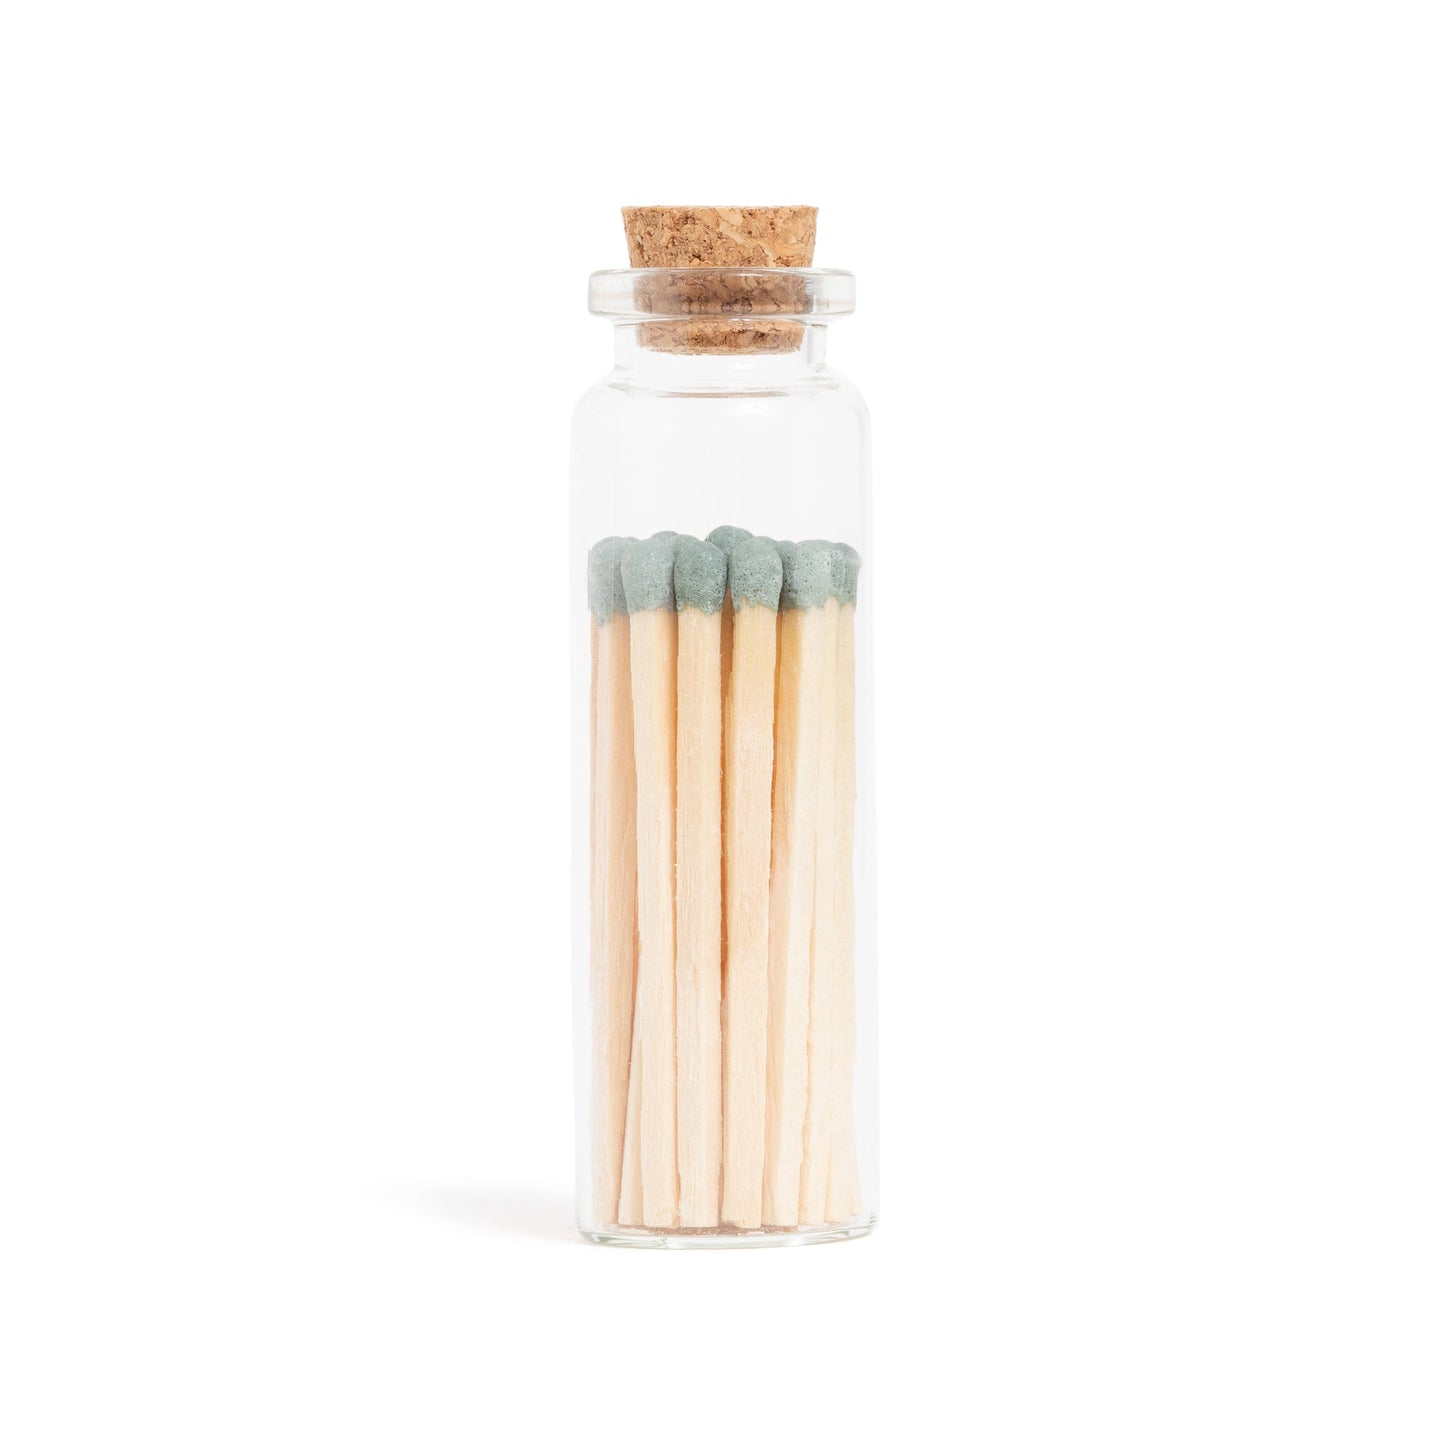 Marine Sage Matches in Small Corked Vial